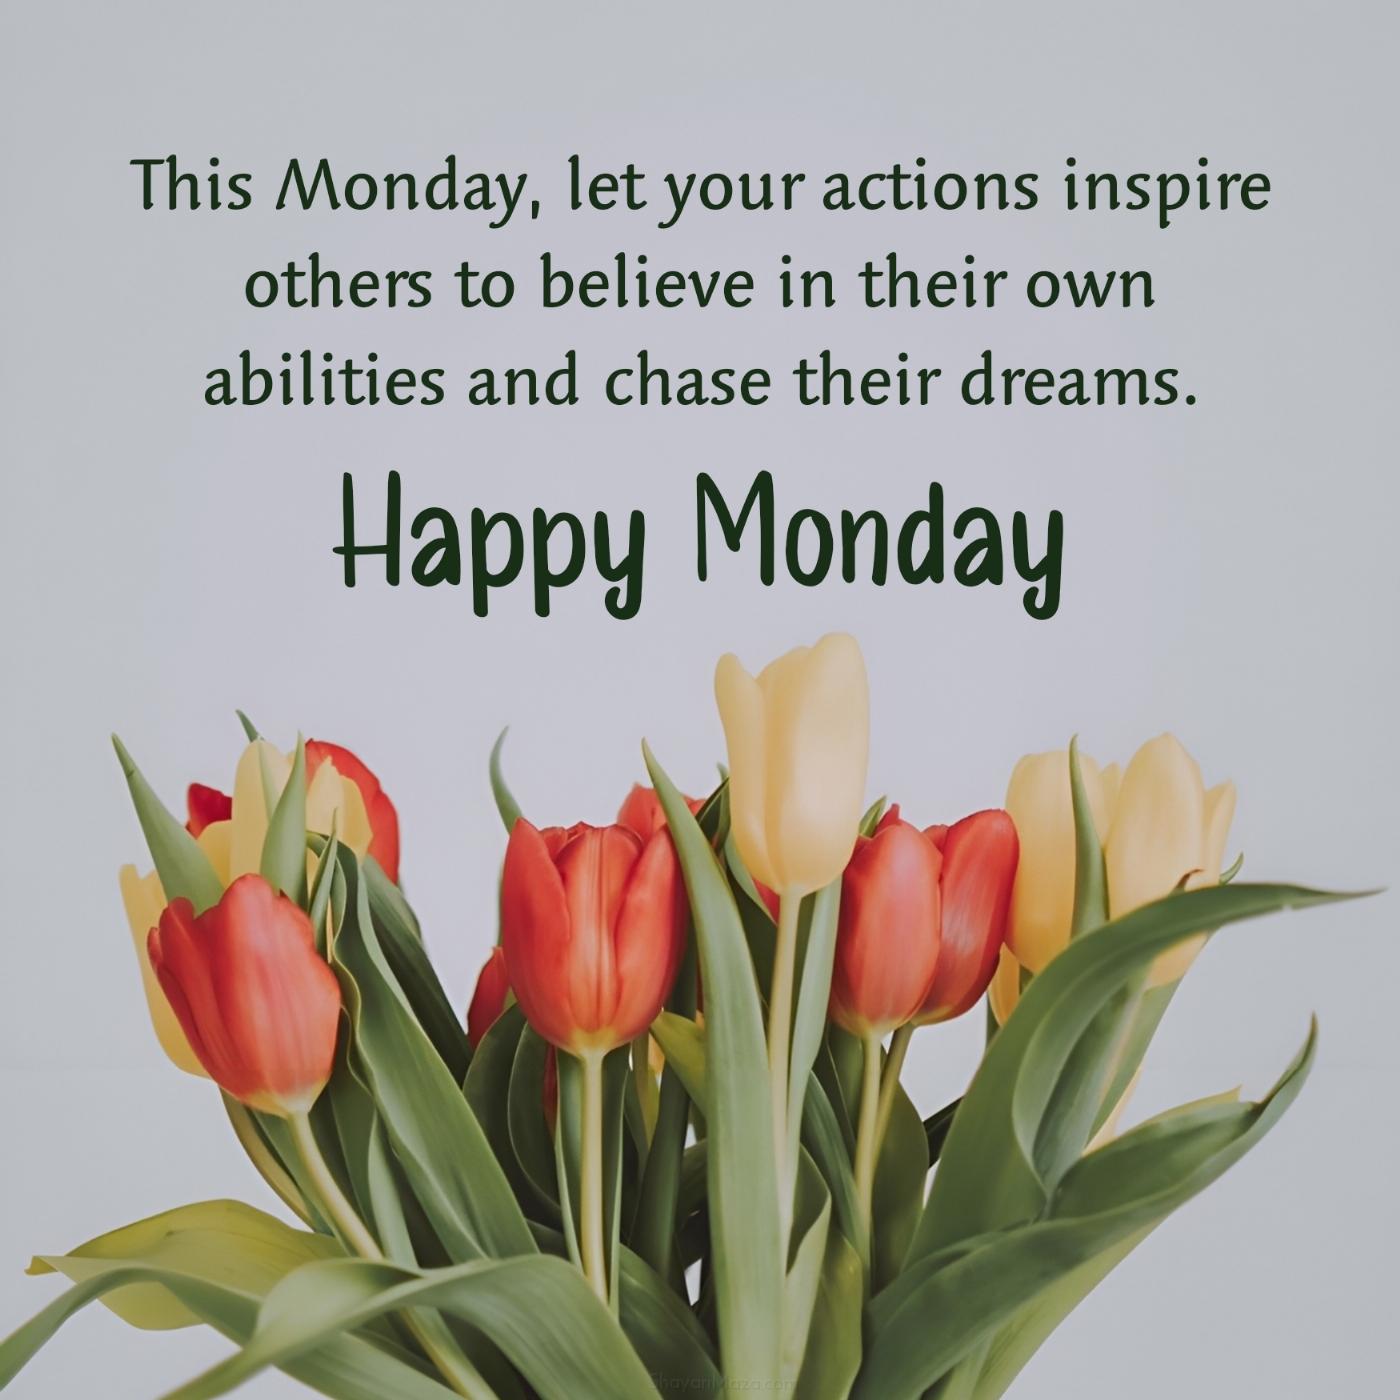 This Monday let your actions inspire others to believe in their own abilities